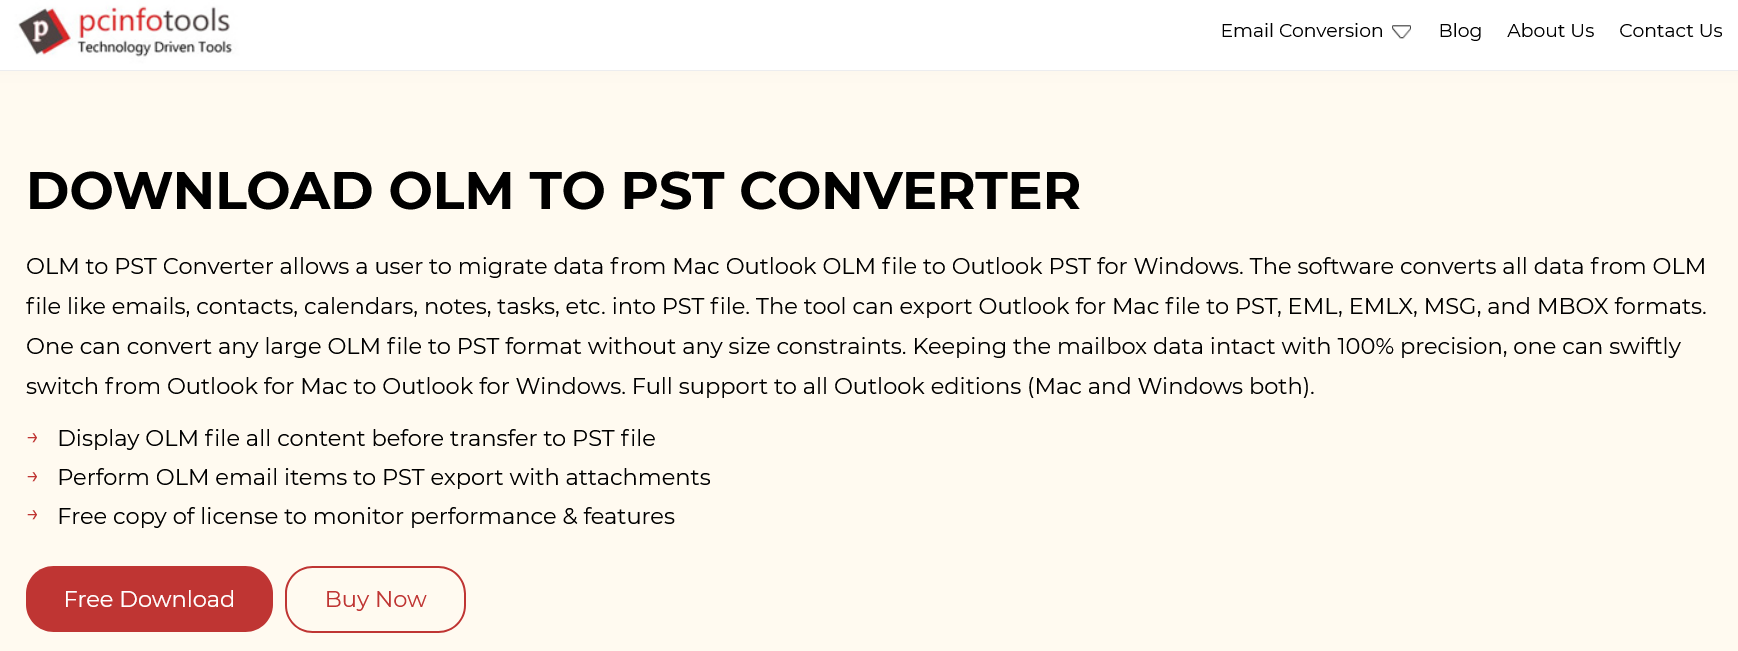 PC Info Tools OLM to PST Converter